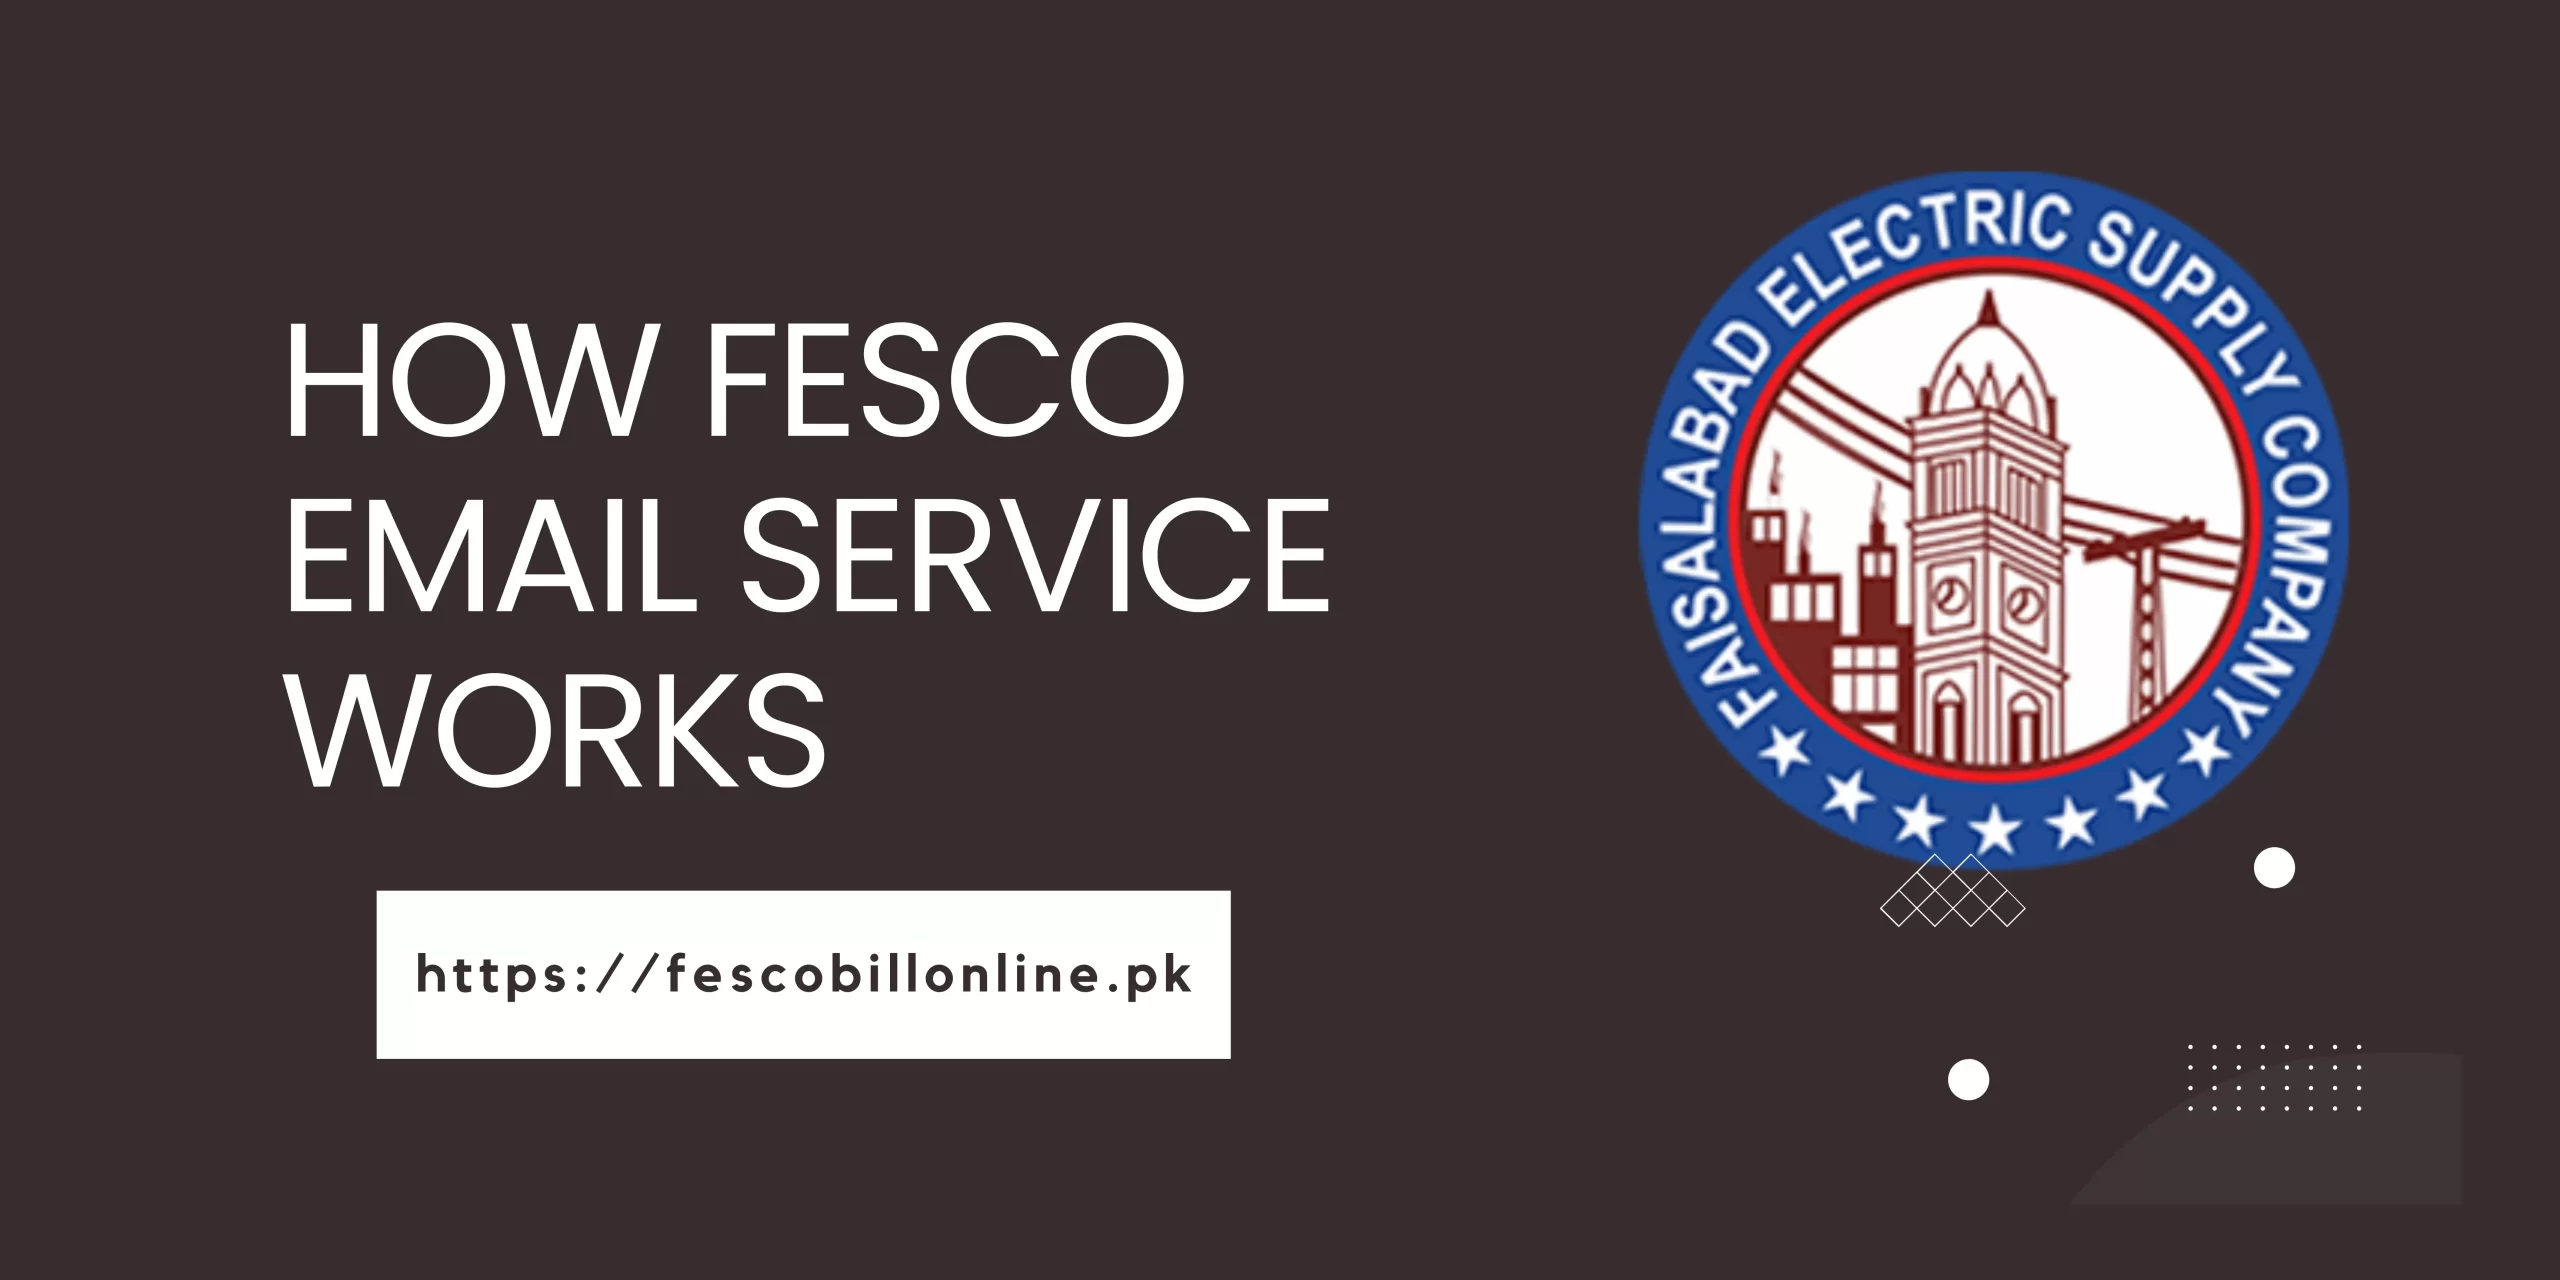 How FESCO Email Service works